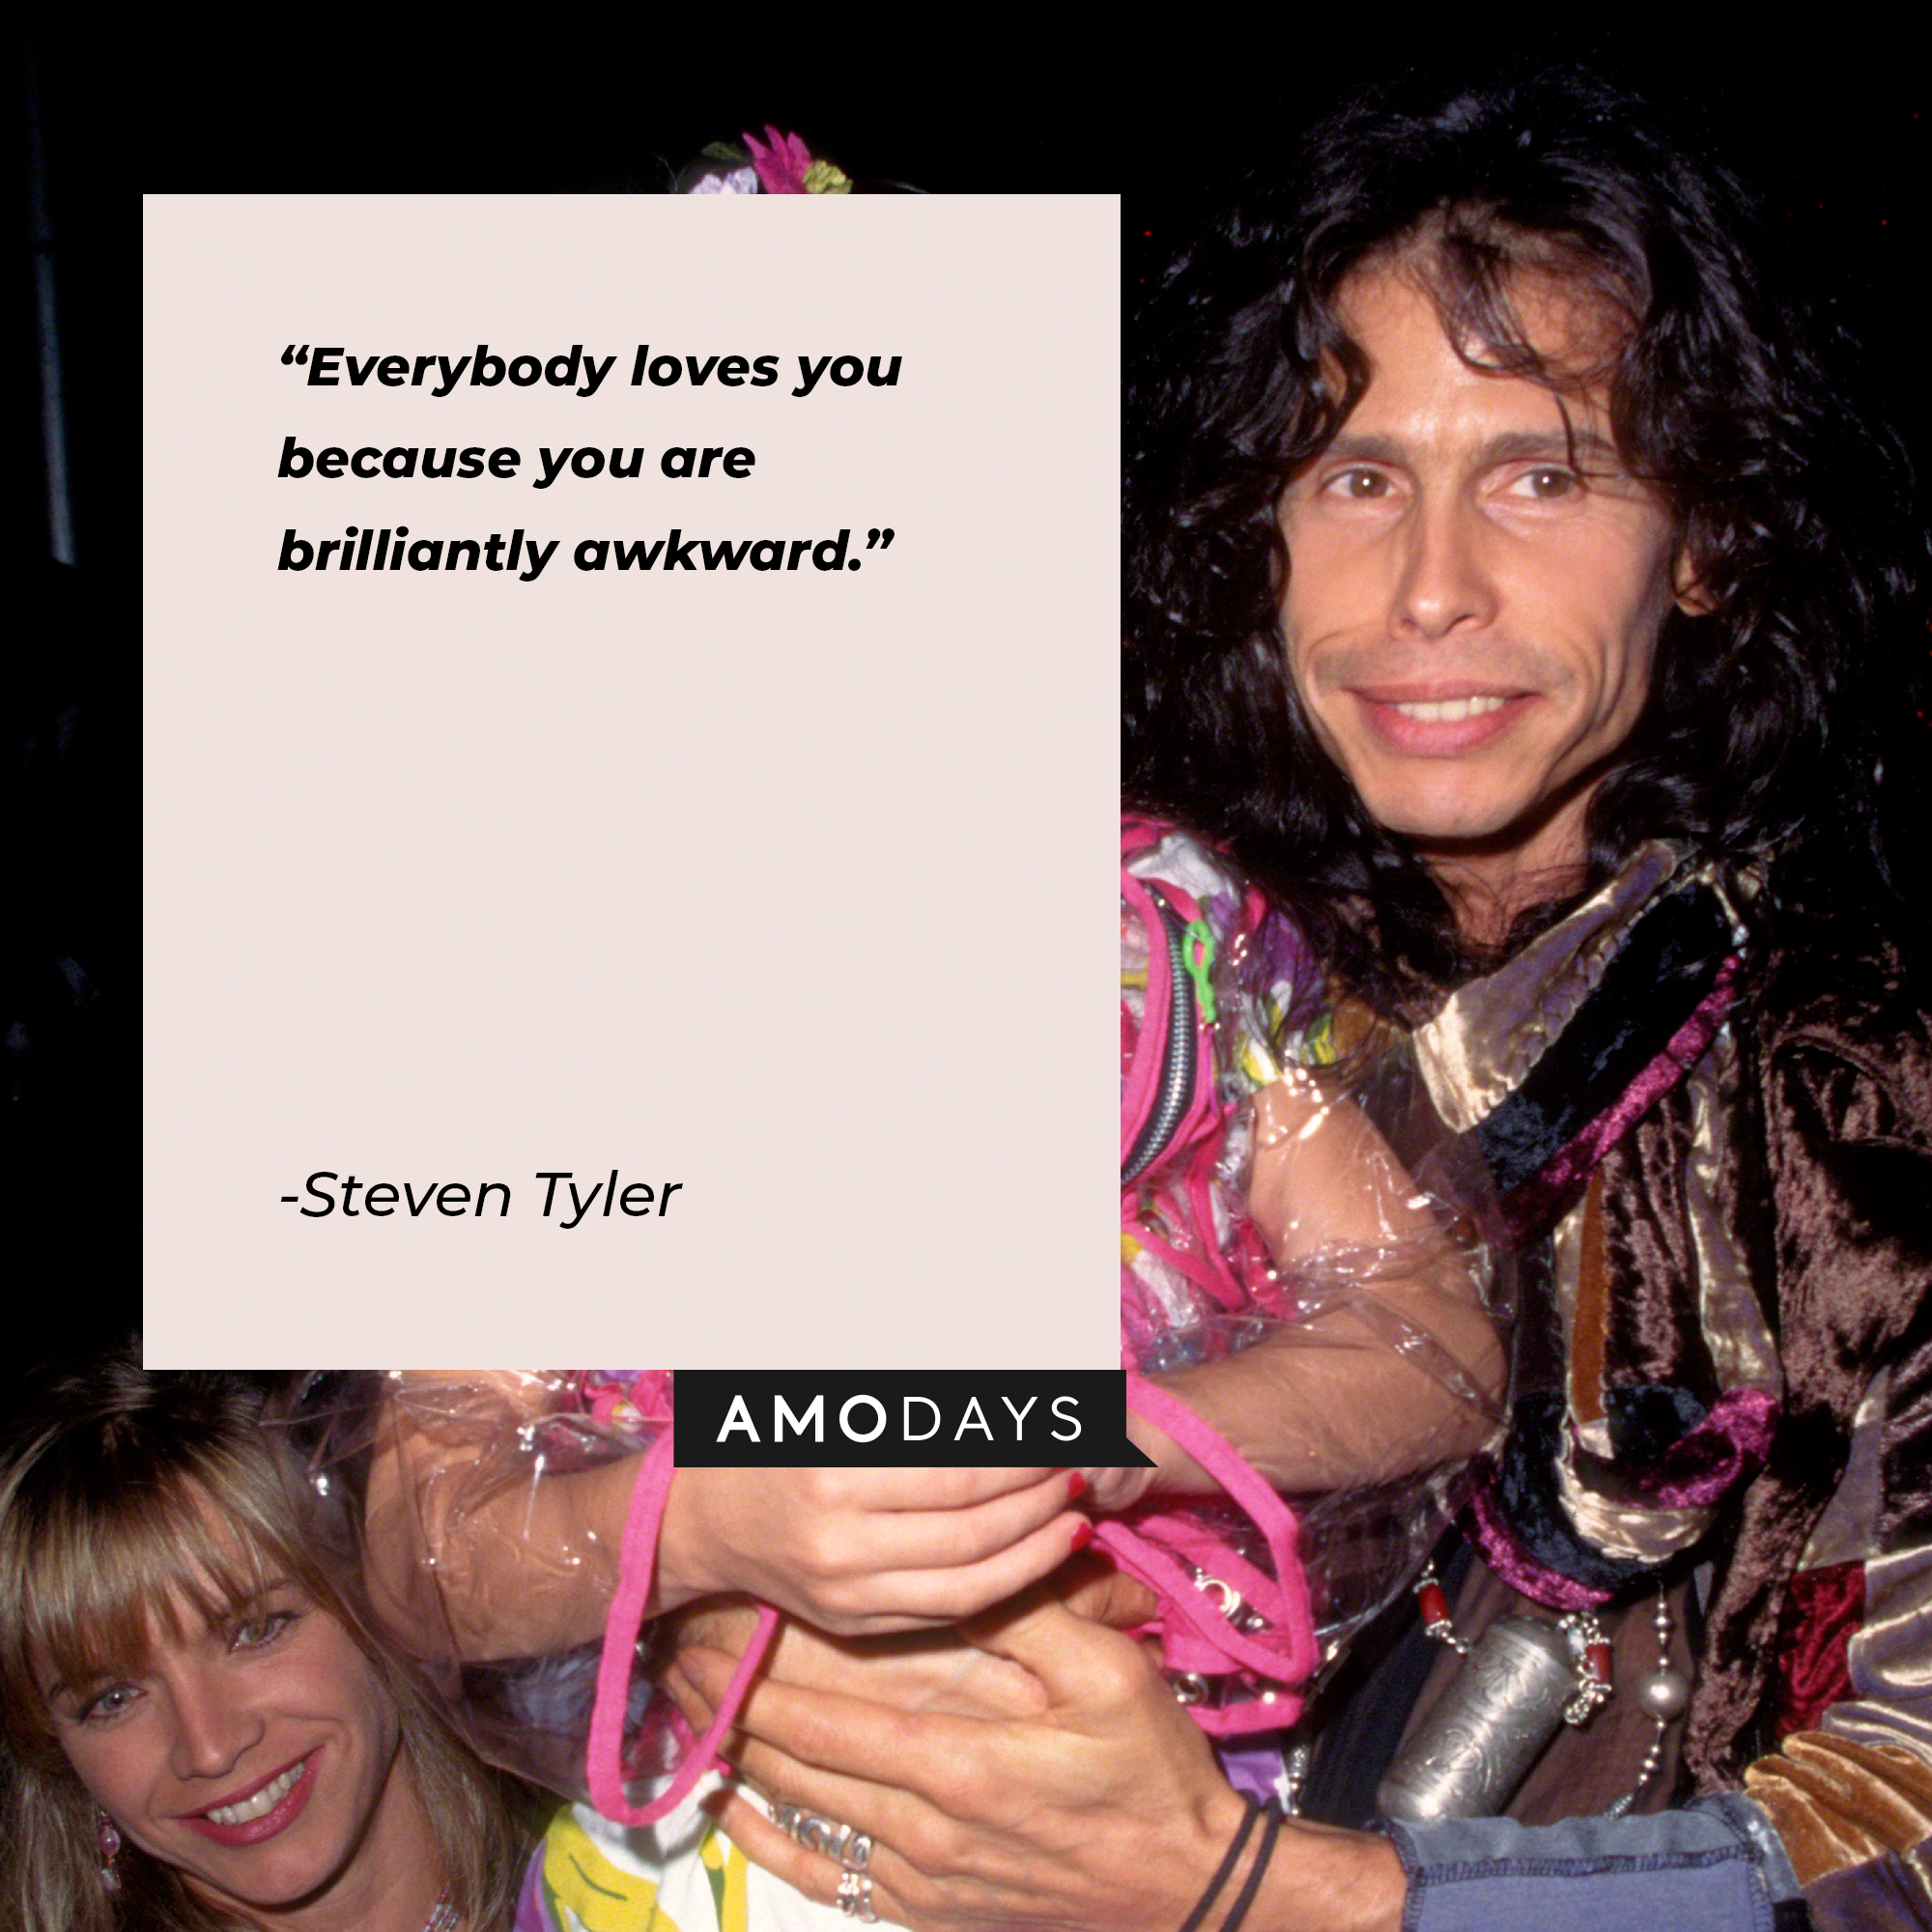 Steven Tyler's quote: "Everybody loves you because you are brilliantly awkward." | Source: Getty Images